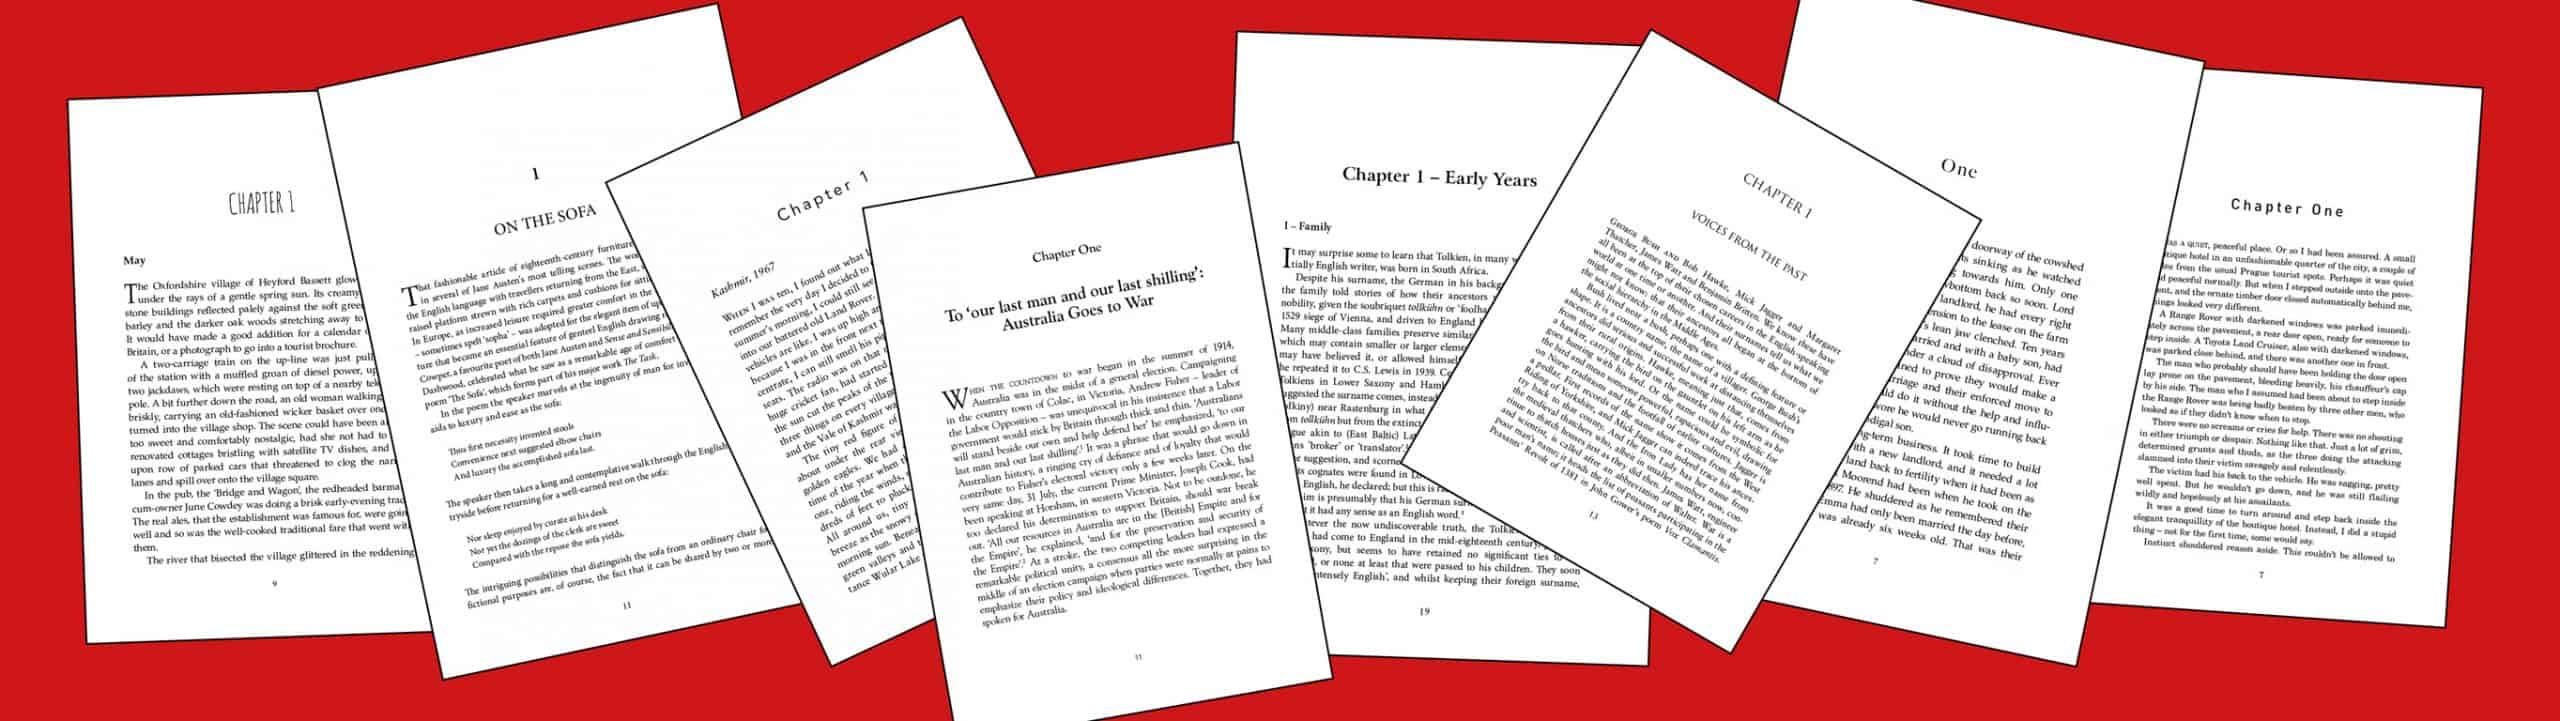 A selection of opening pages from books